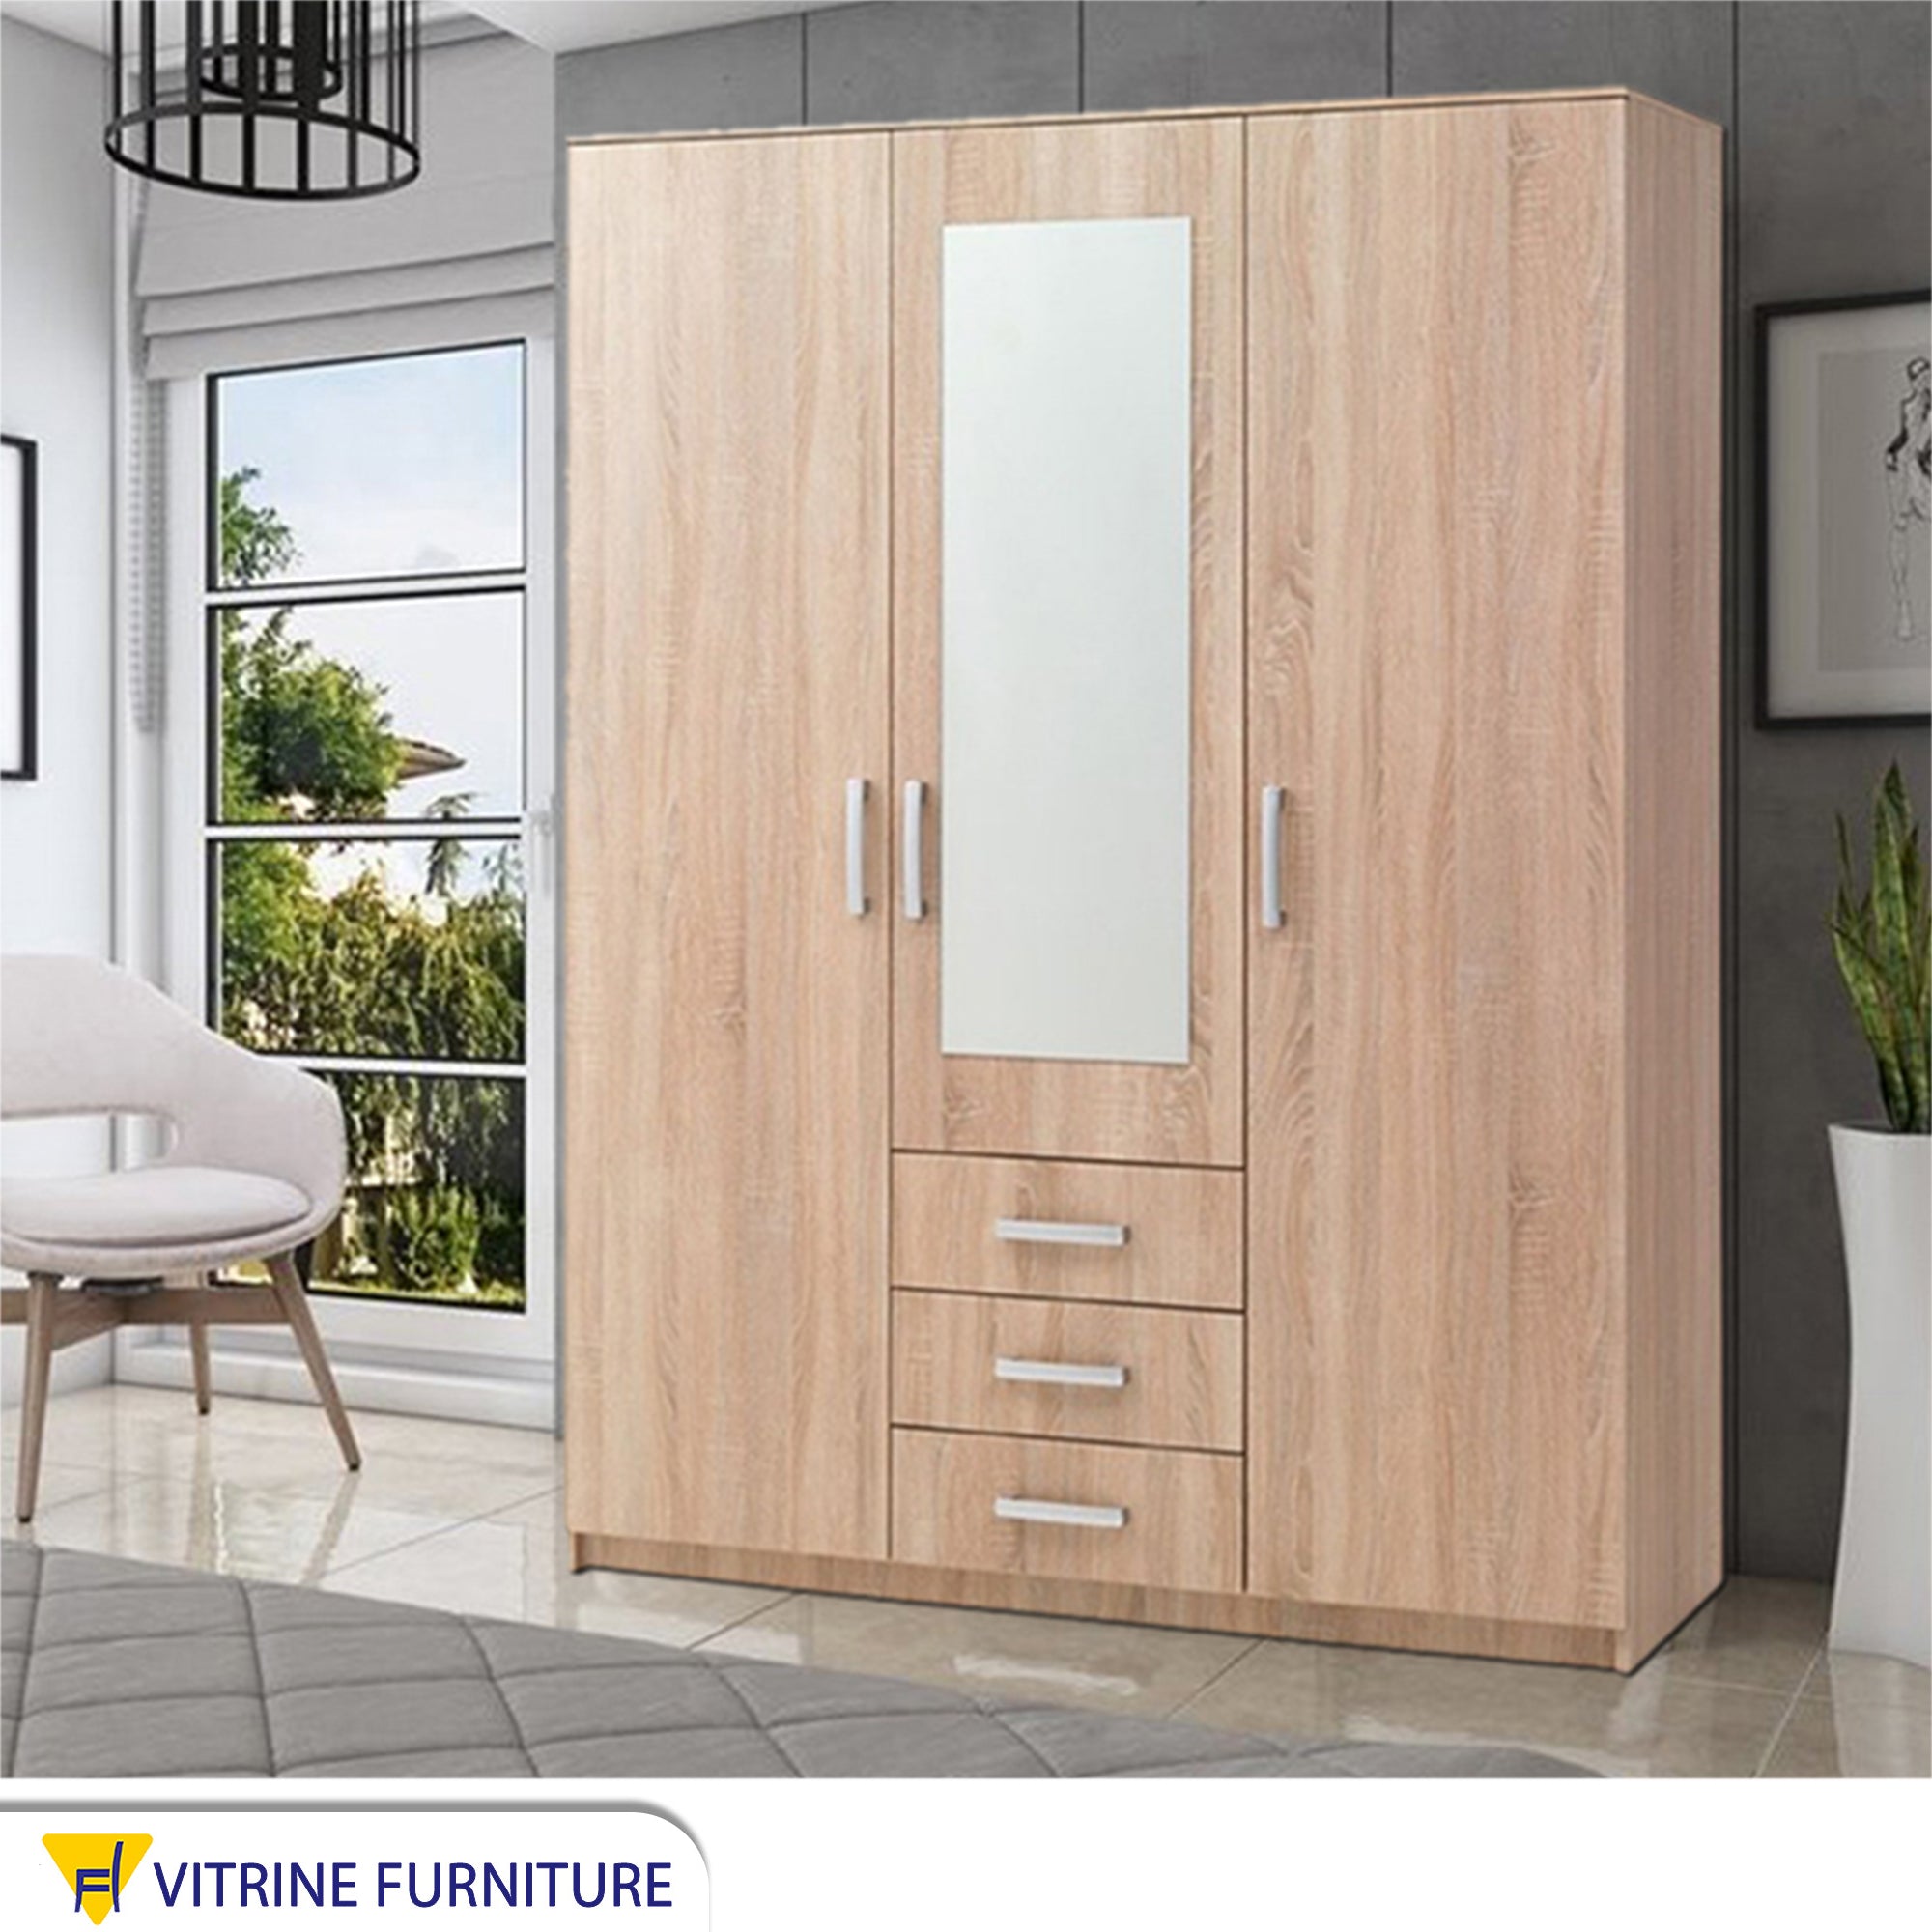 A beige wardrobe with three doors, including a mirrored door and three drawers